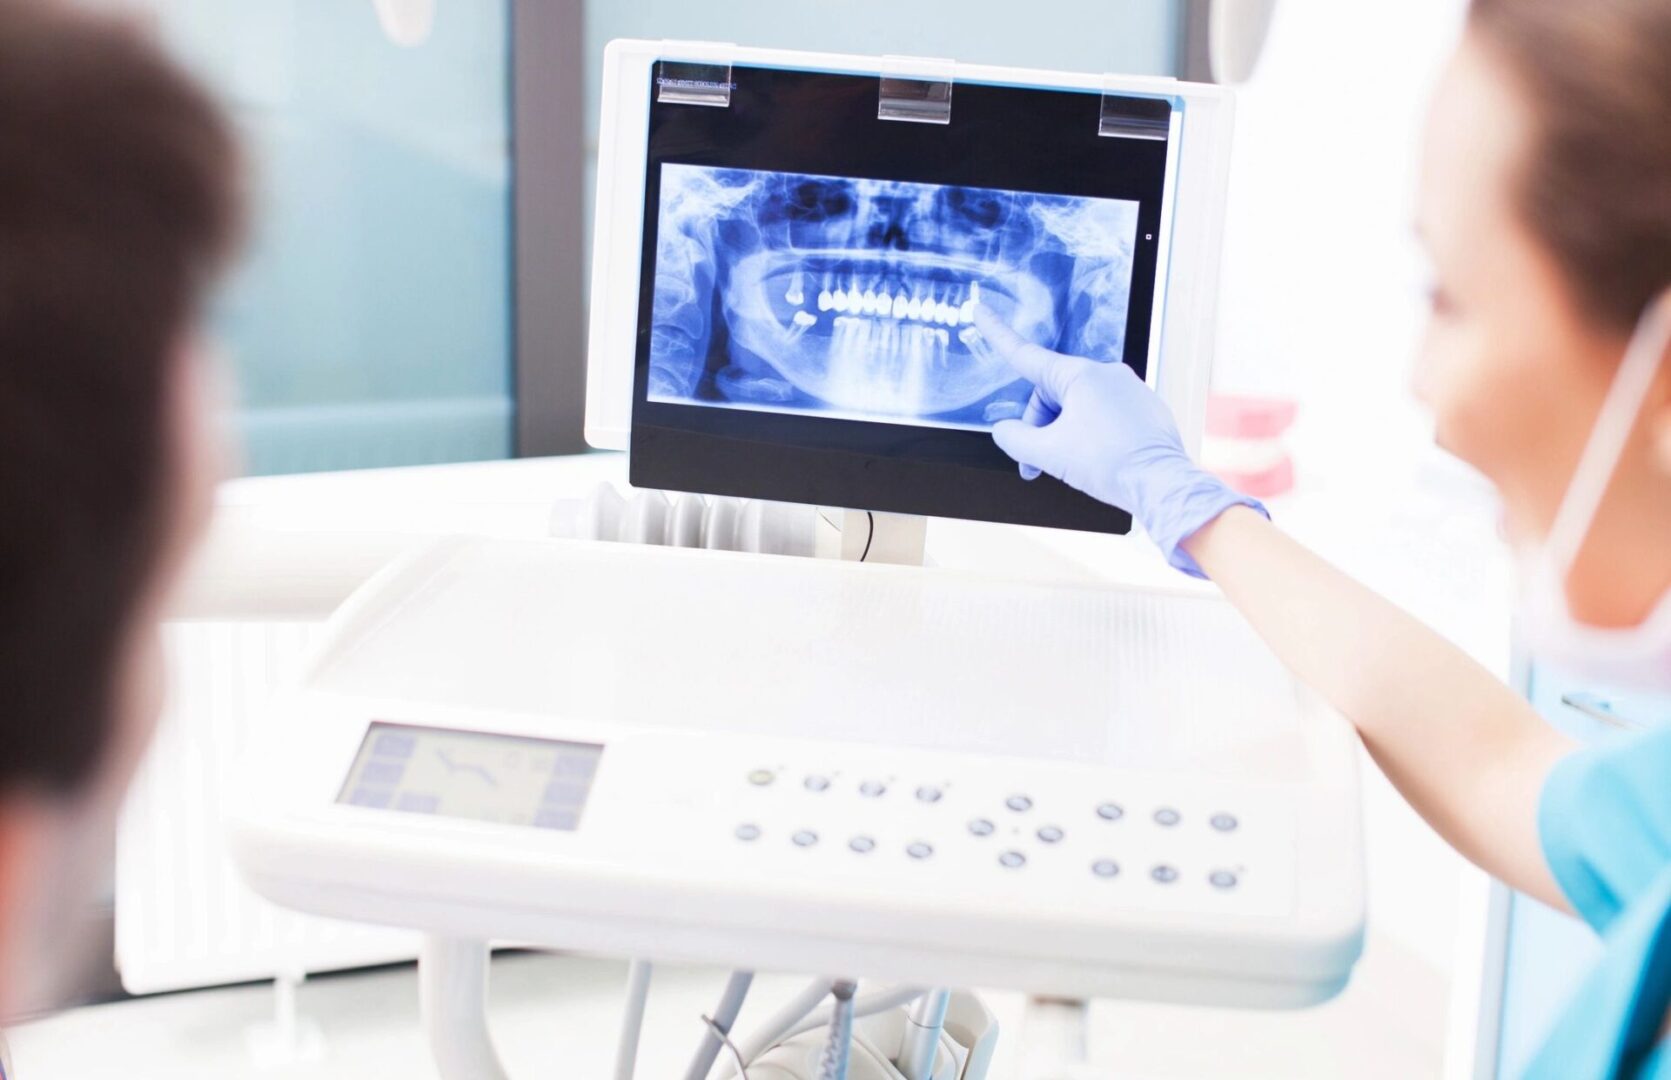 A person is using an electronic device to view the teeth.